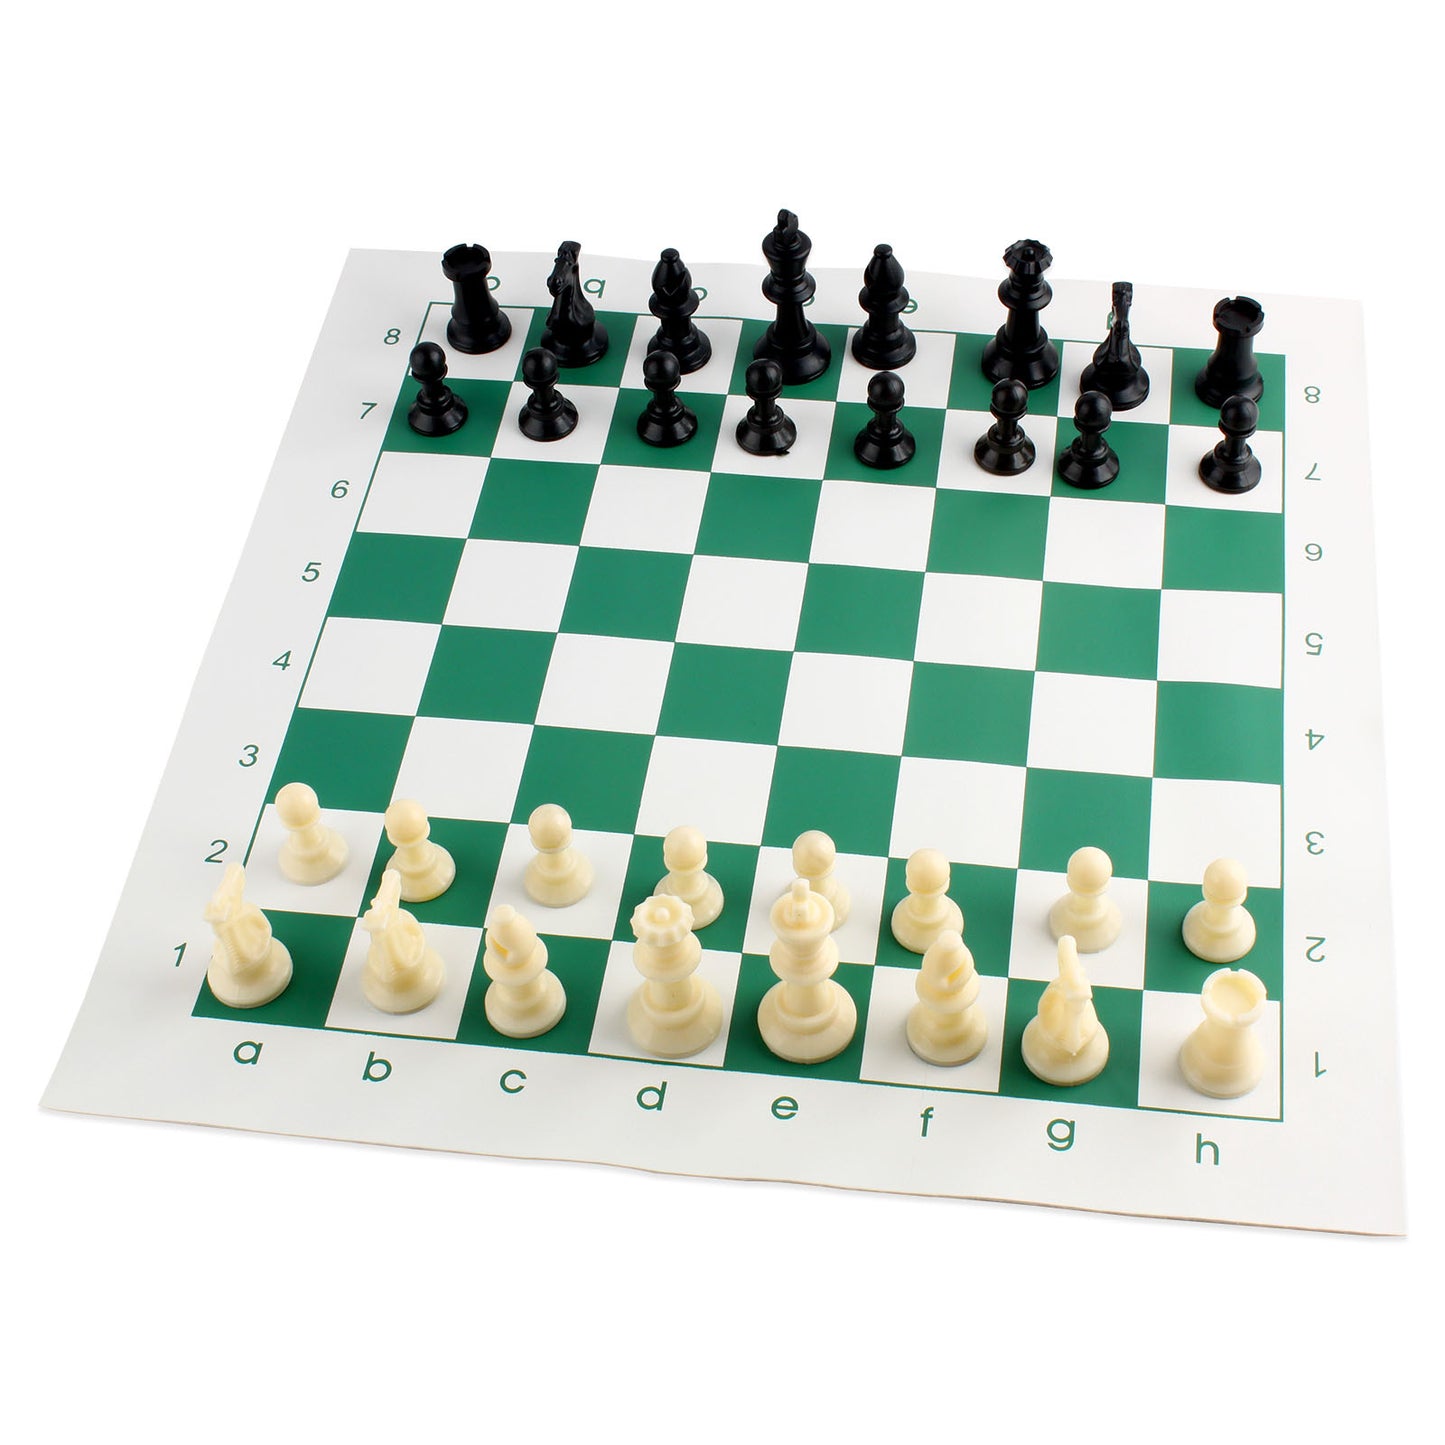 Andux Chess Pieces and Rollable Board XQTZ-01 (Green,35x35cm)